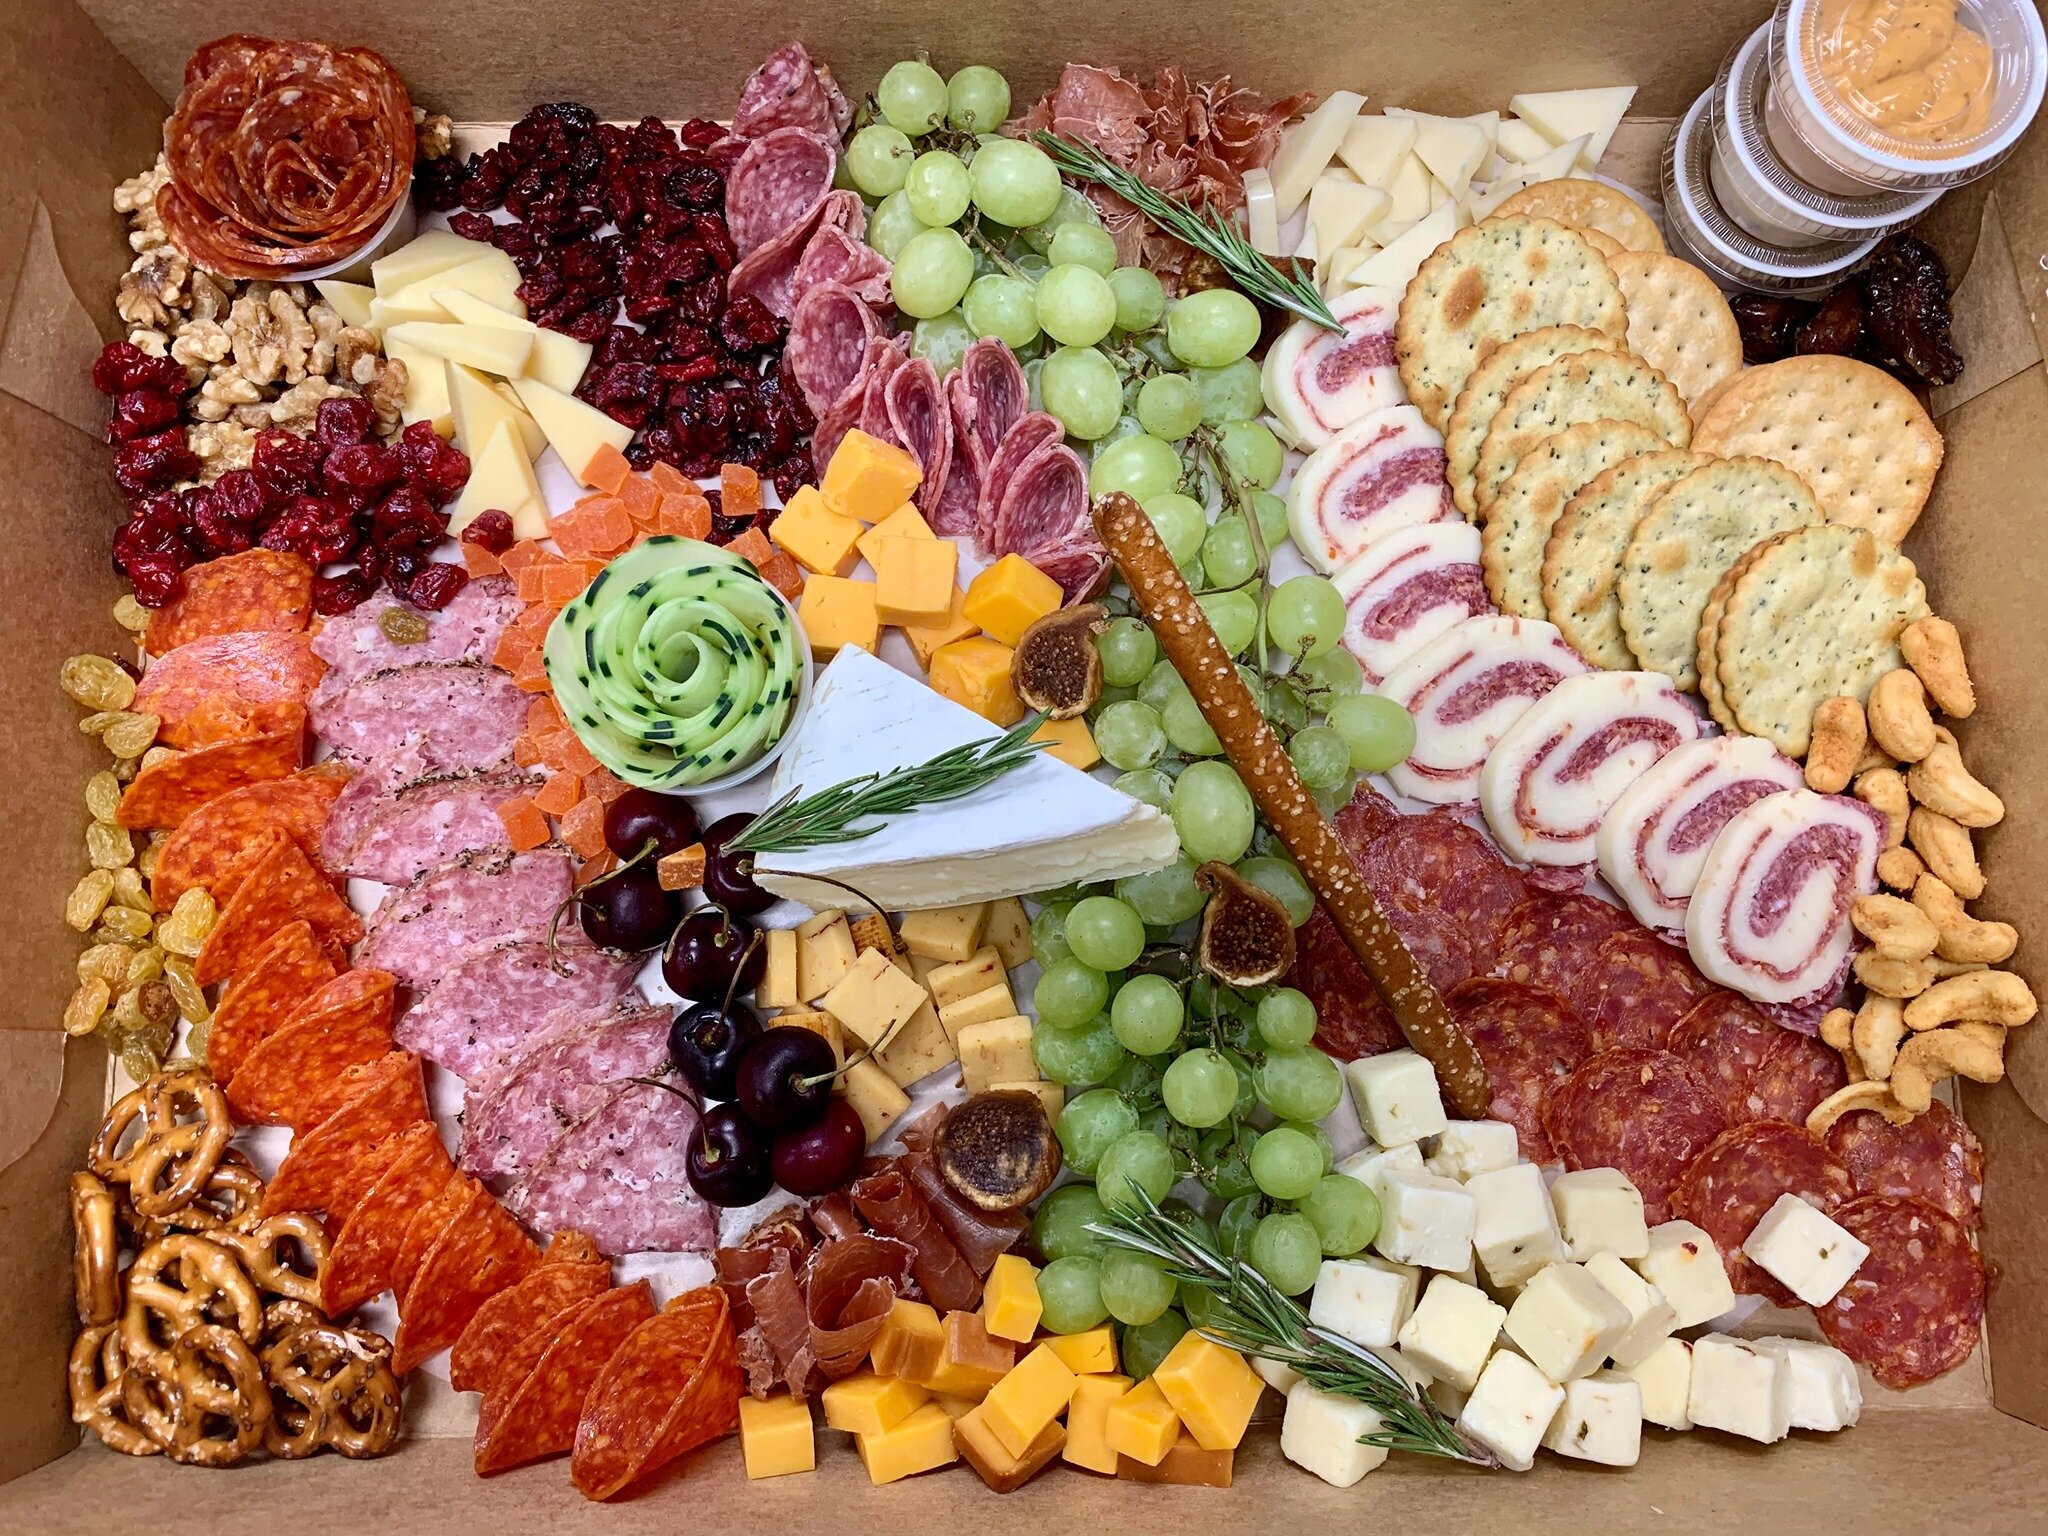 charcuterie board from the local juice co. back to school treats for mom boerne texas hill country mile texas hill country corner cartel blog